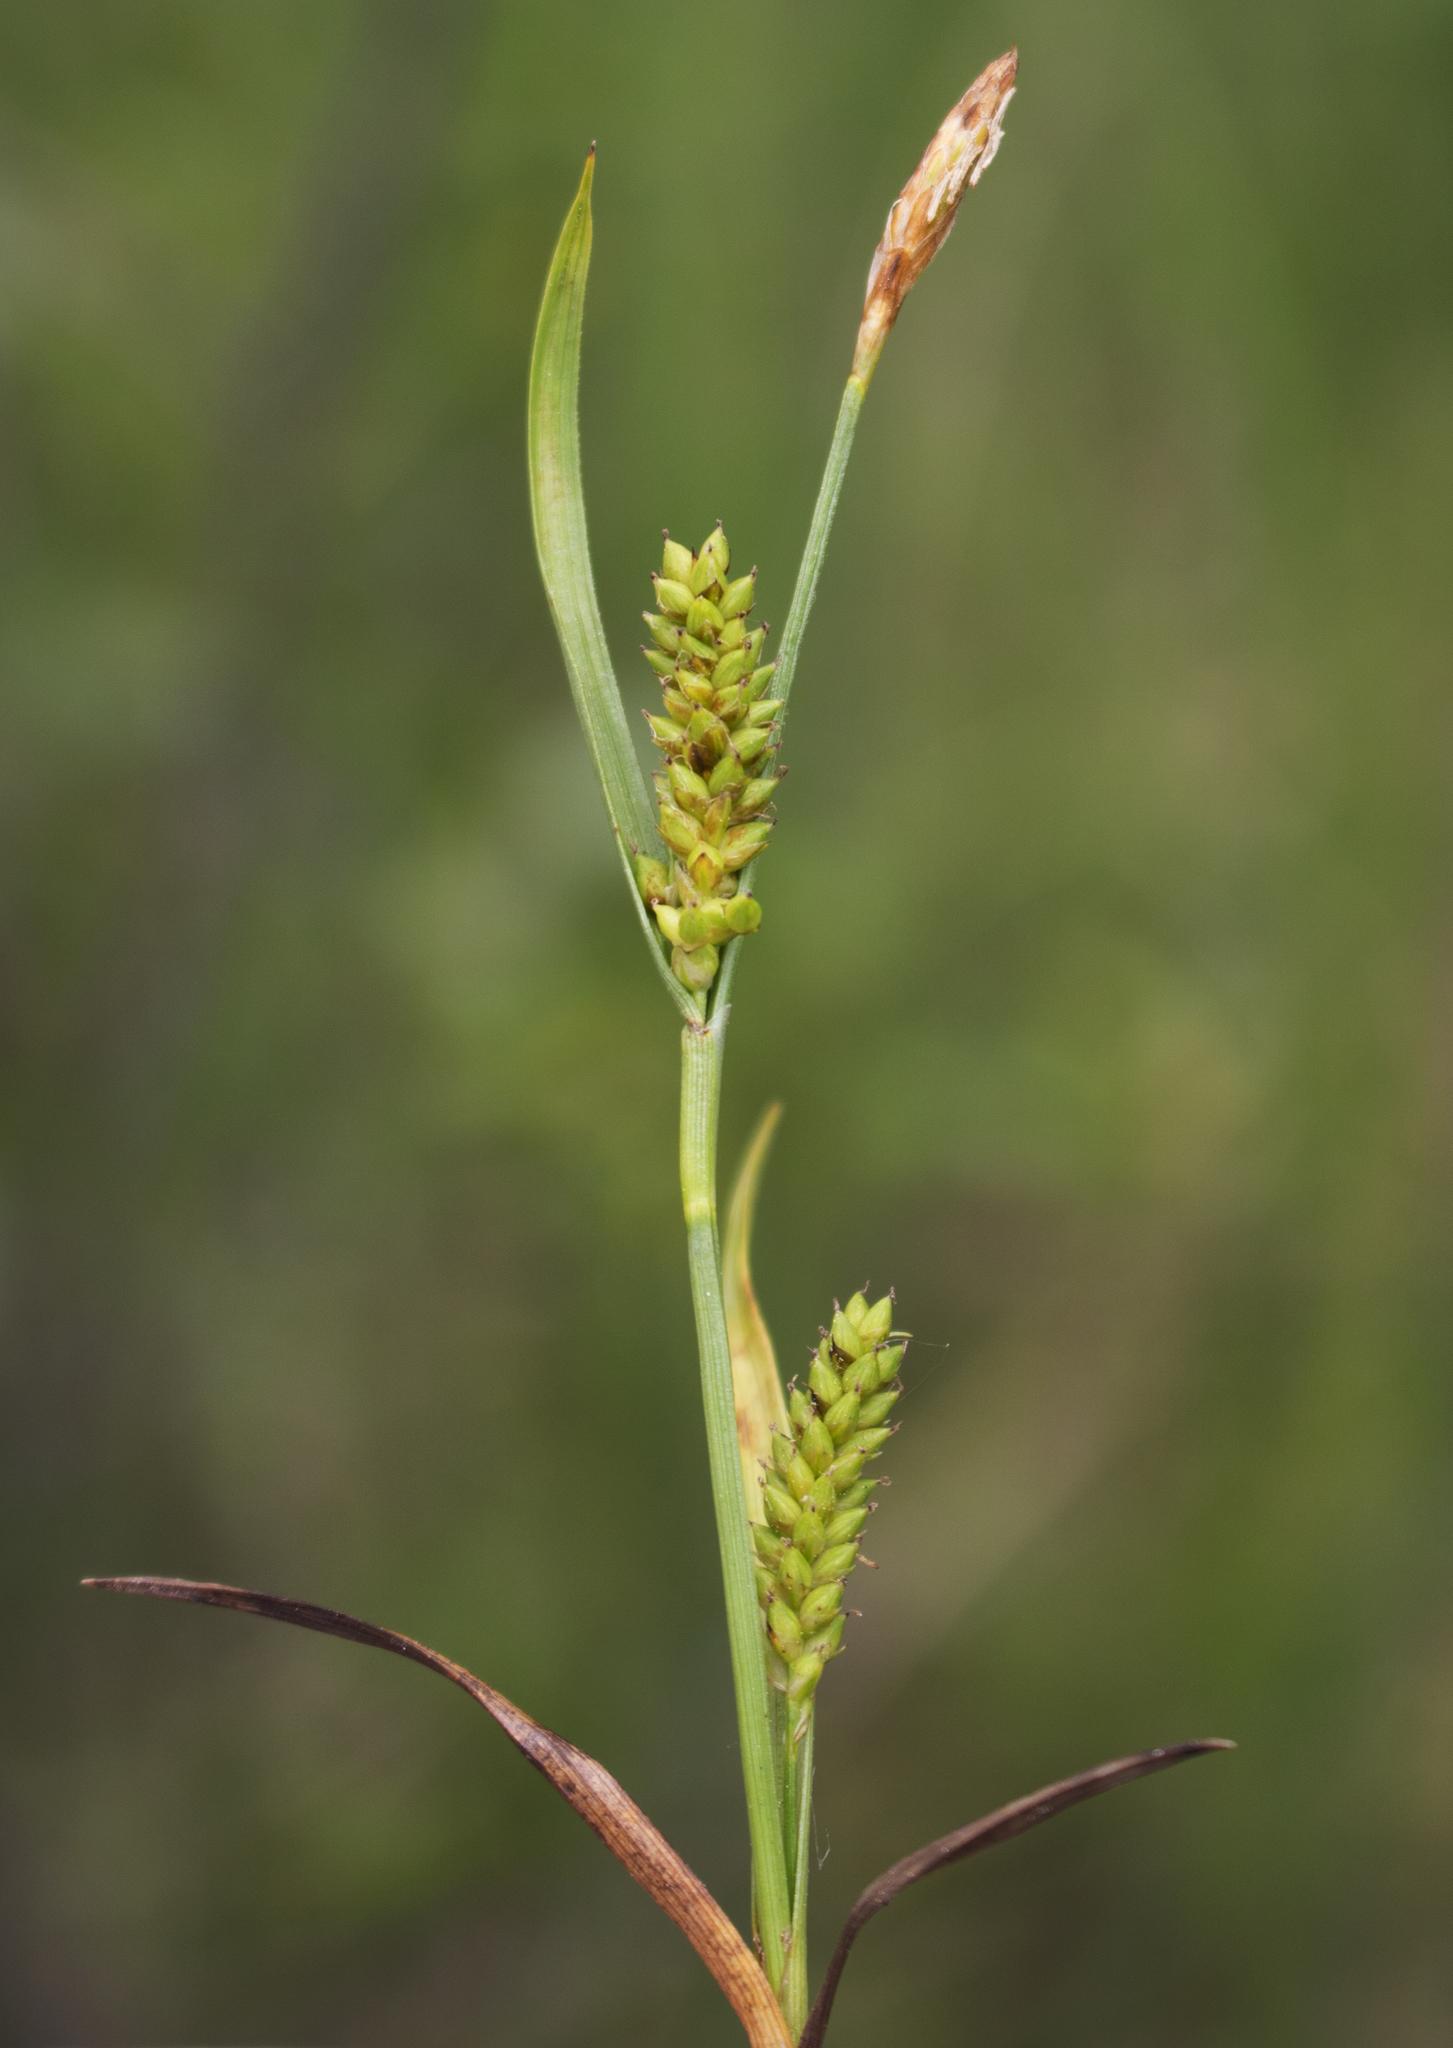 lime-yellow spikelets with brown-green foliage and stems